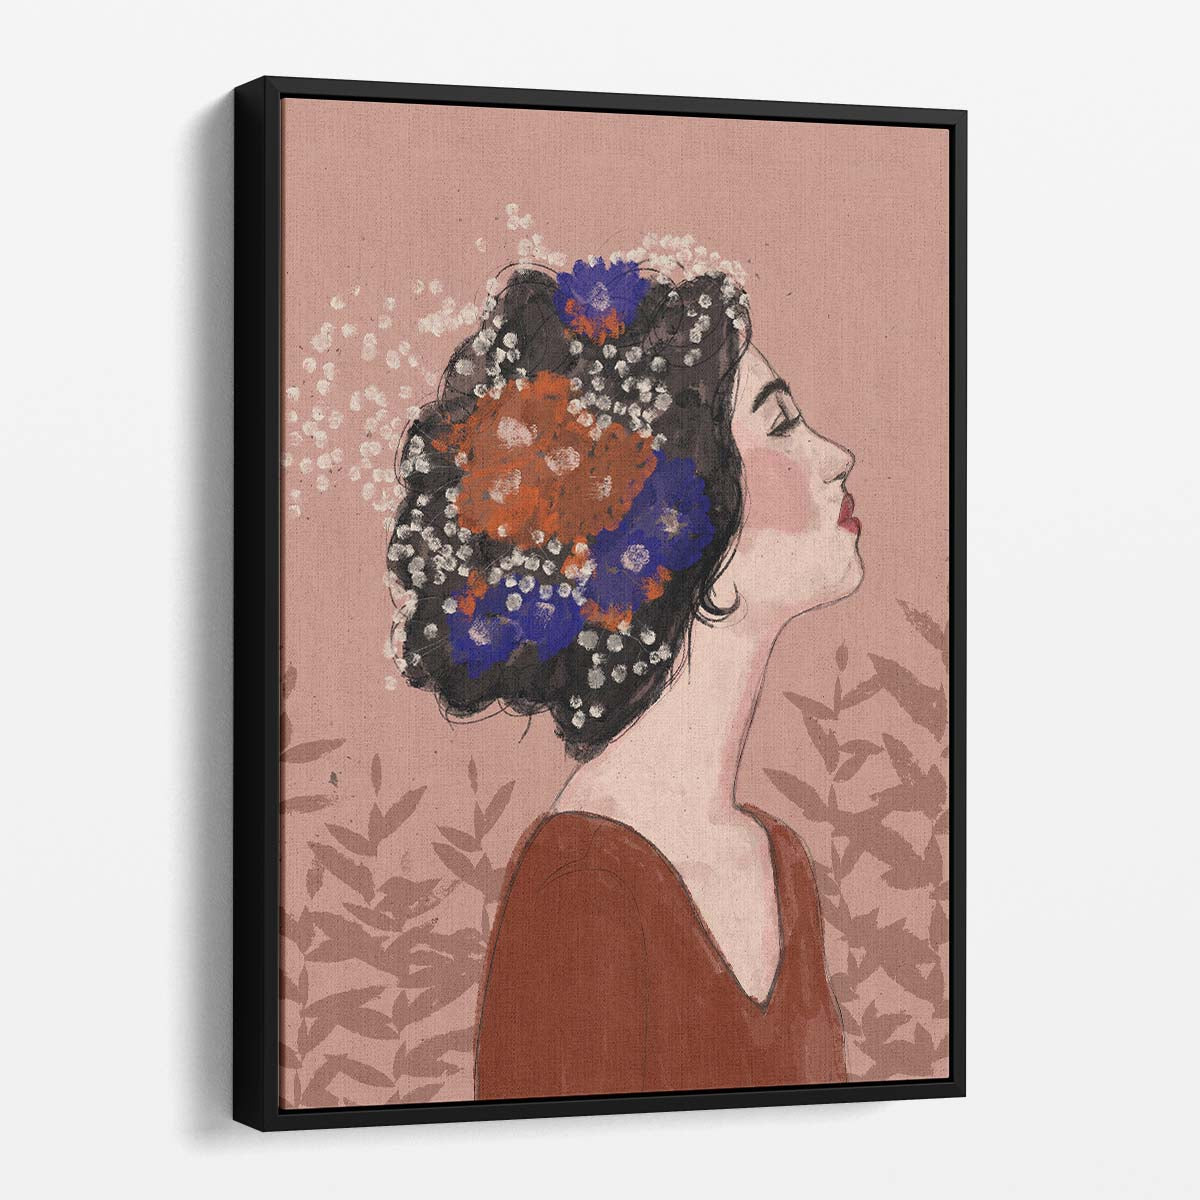 Treechild's Summer Desire Frida Kahlo Inspired Floral Woman Illustration by Luxuriance Designs, made in USA